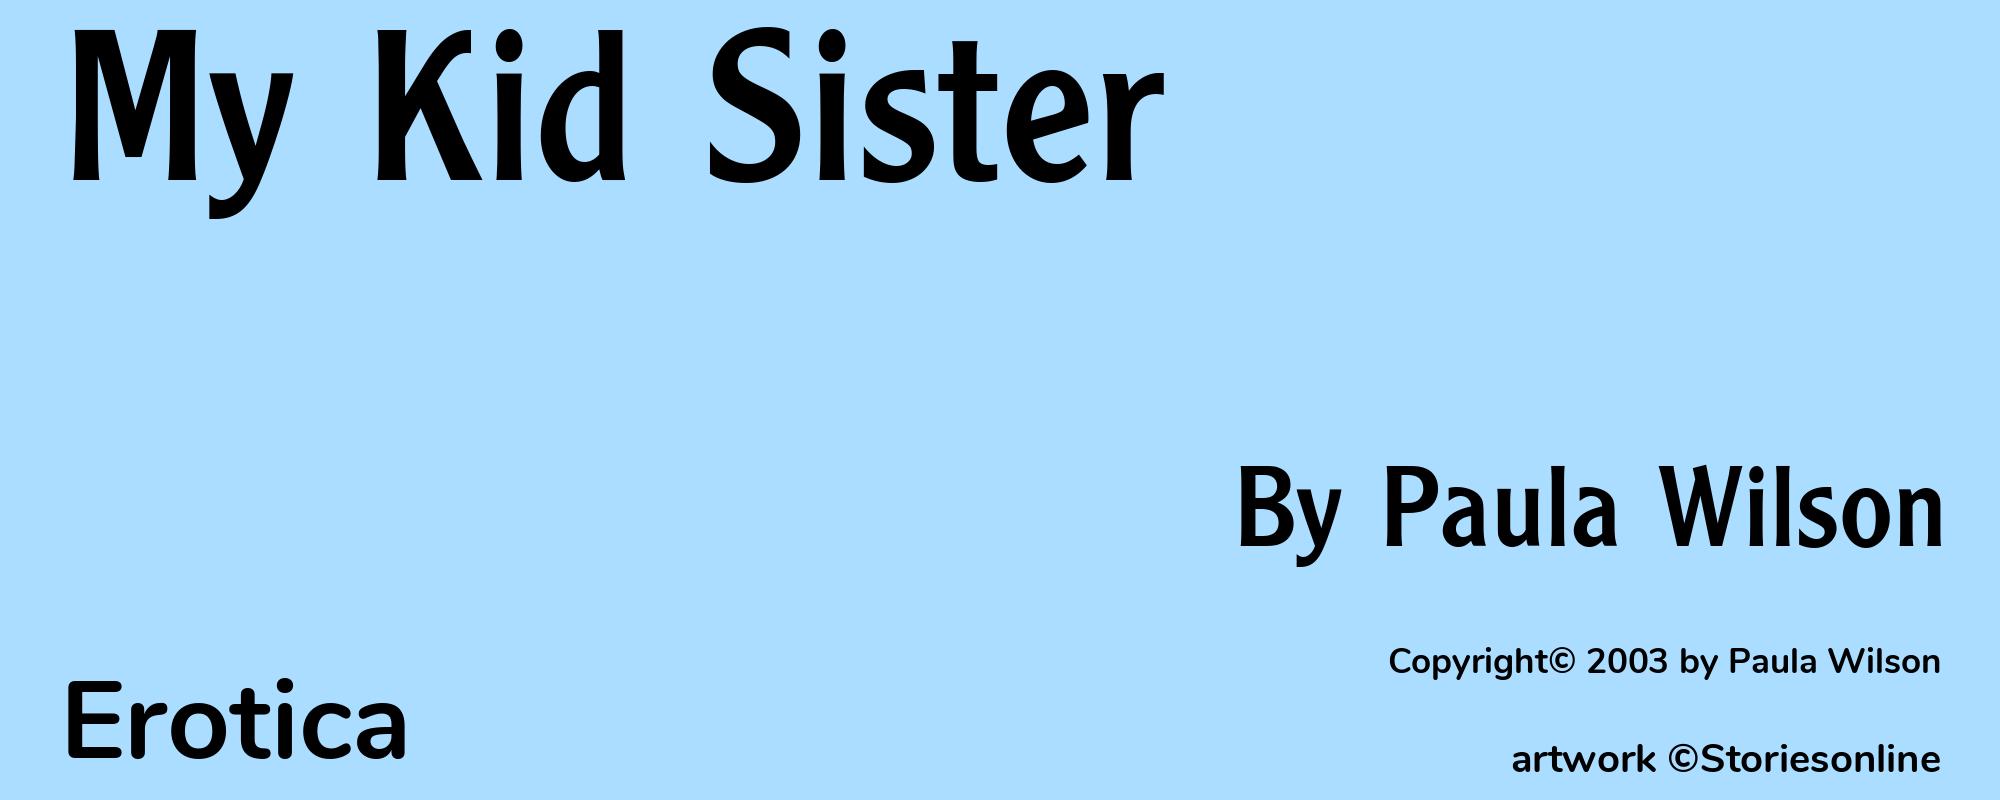 My Kid Sister - Cover